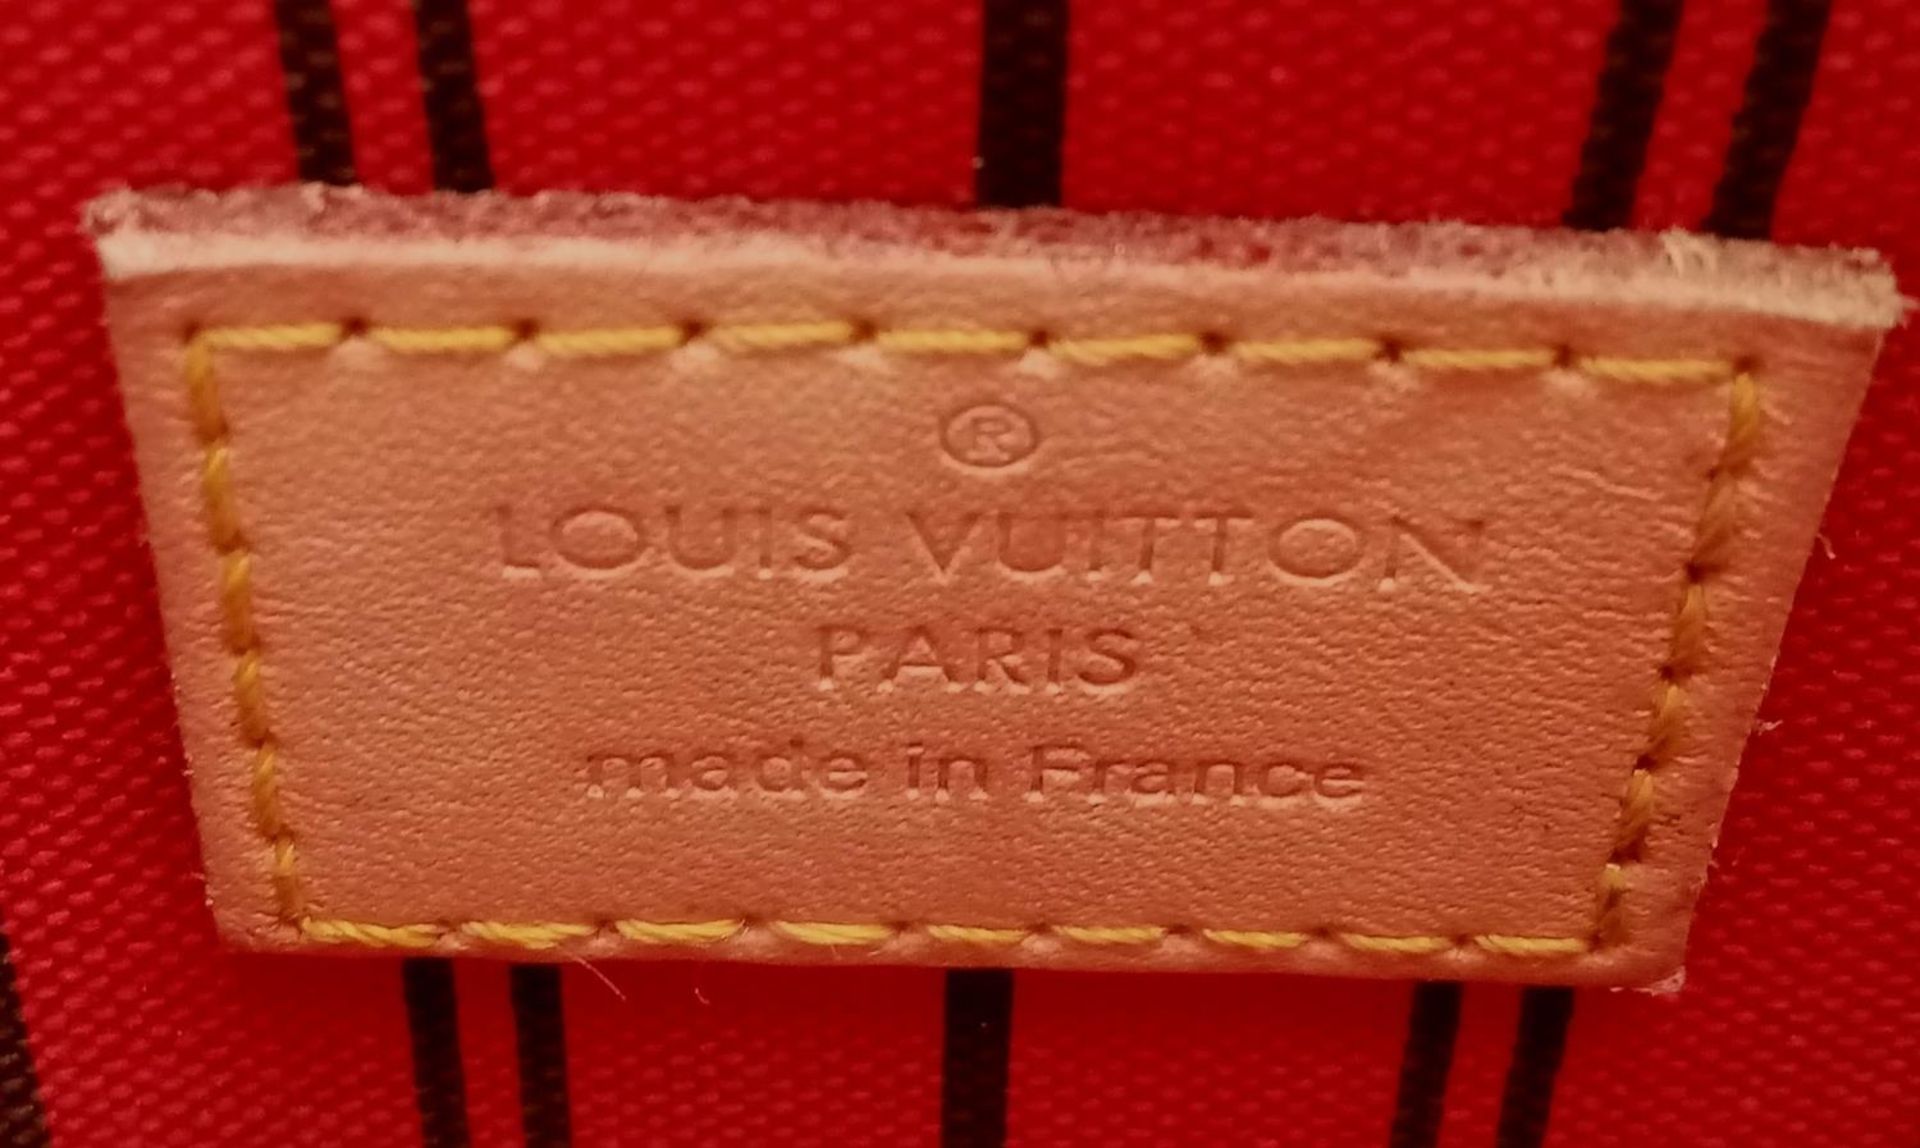 A Louis Vuitton Neverfull Pochette. Monogramed canvas exterior with gold-toned hardware and zip - Bild 6 aus 7